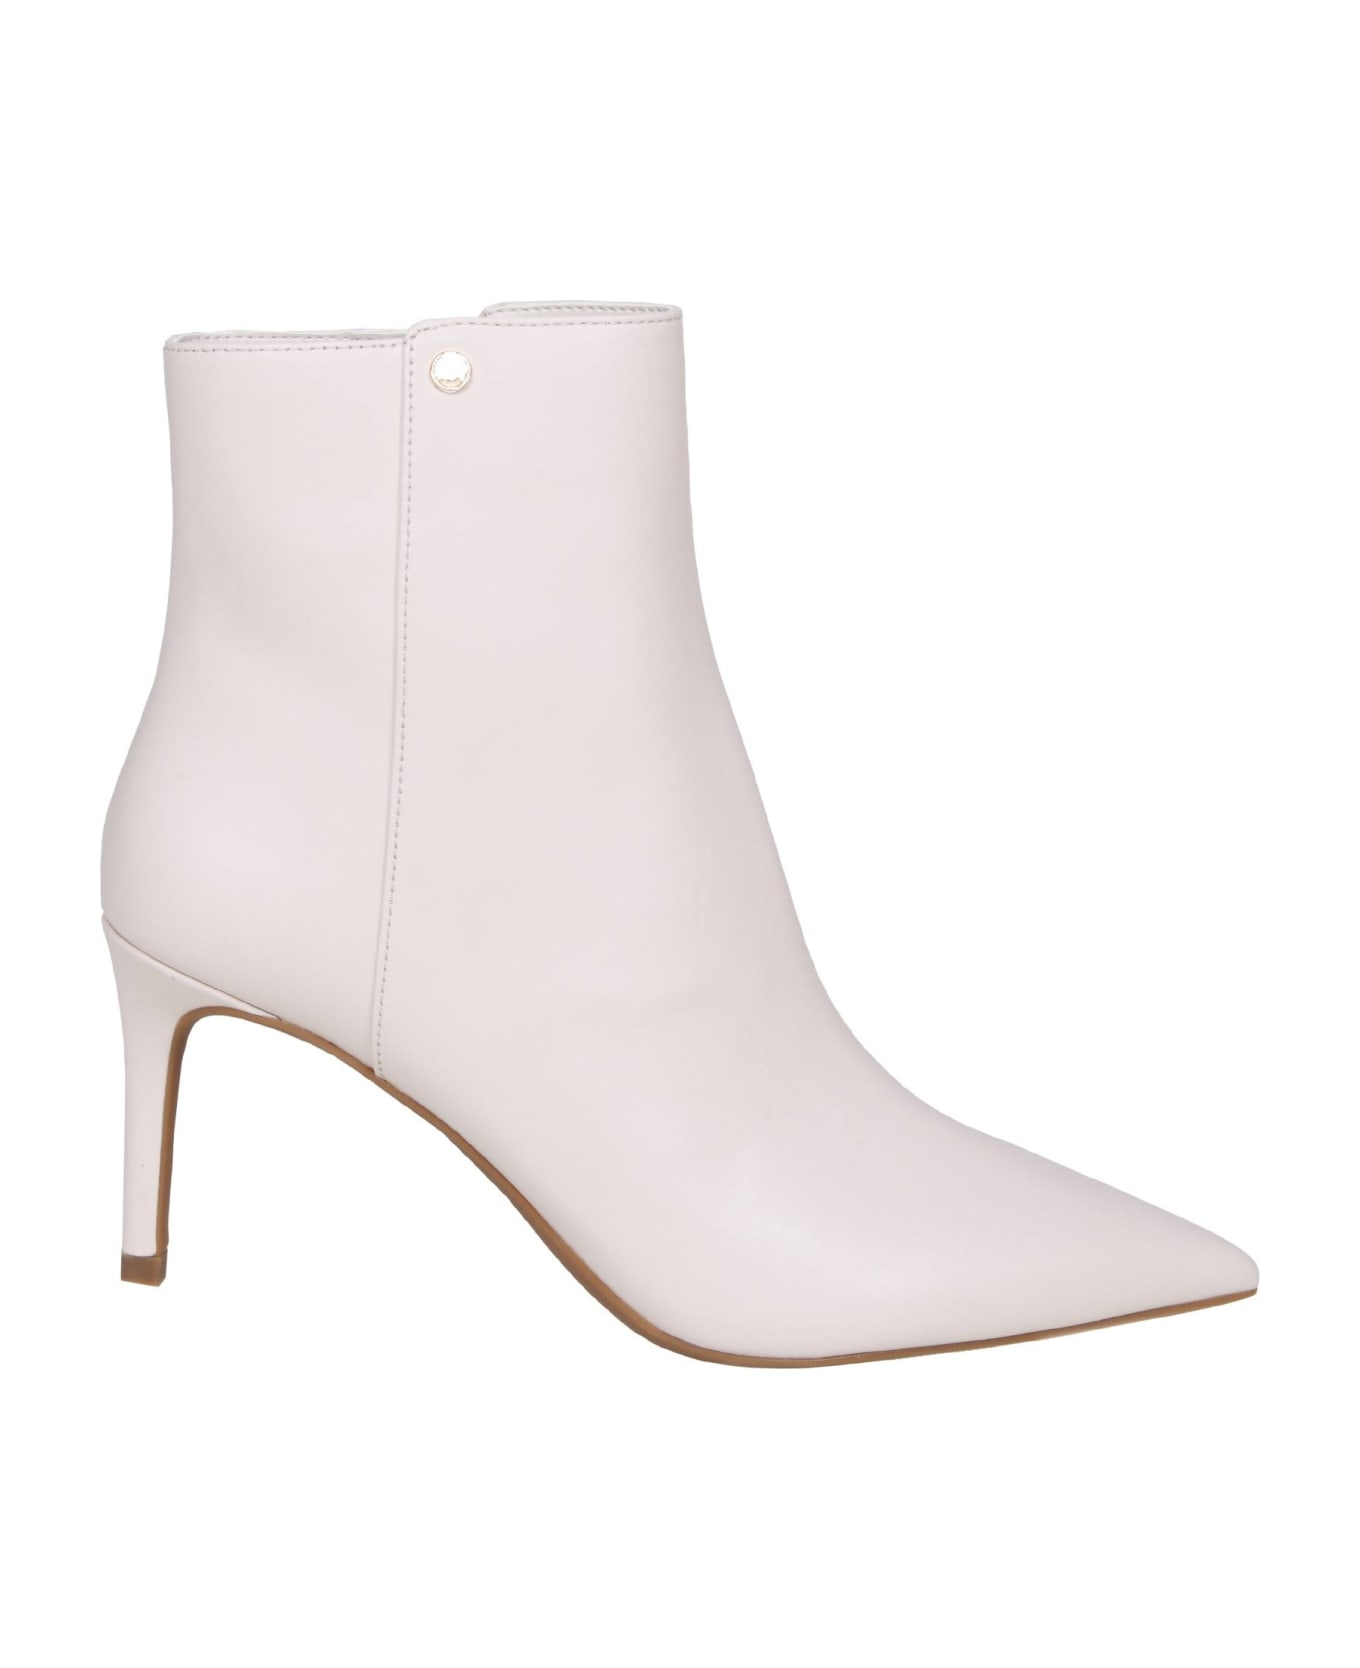 Michael Kors Boots In White Leather Michael Kors - WHITE ブーツ